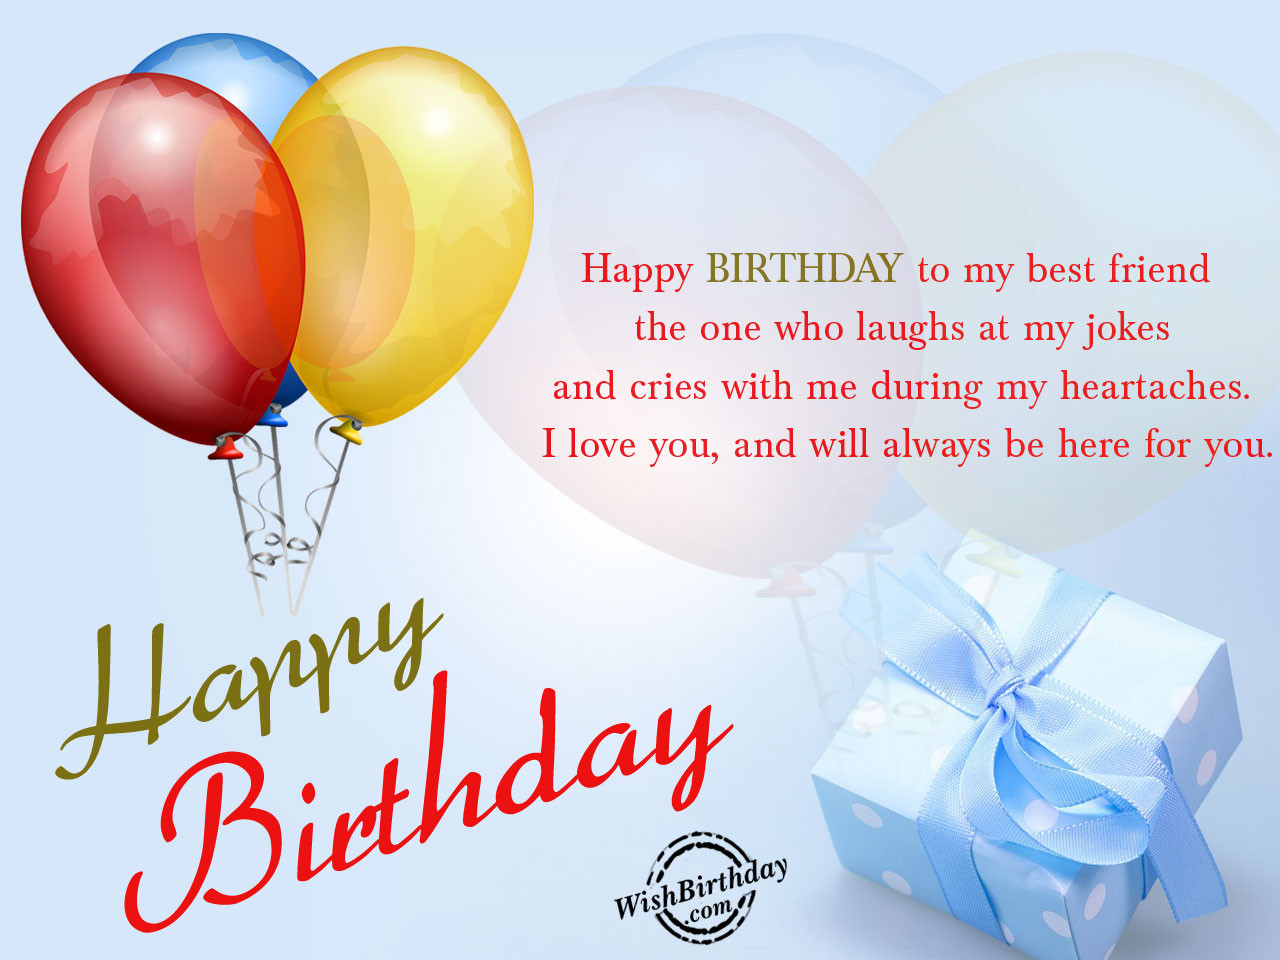 Quote For Best Friend Birthday
 250 Happy Birthday Wishes for Friends [MUST READ]